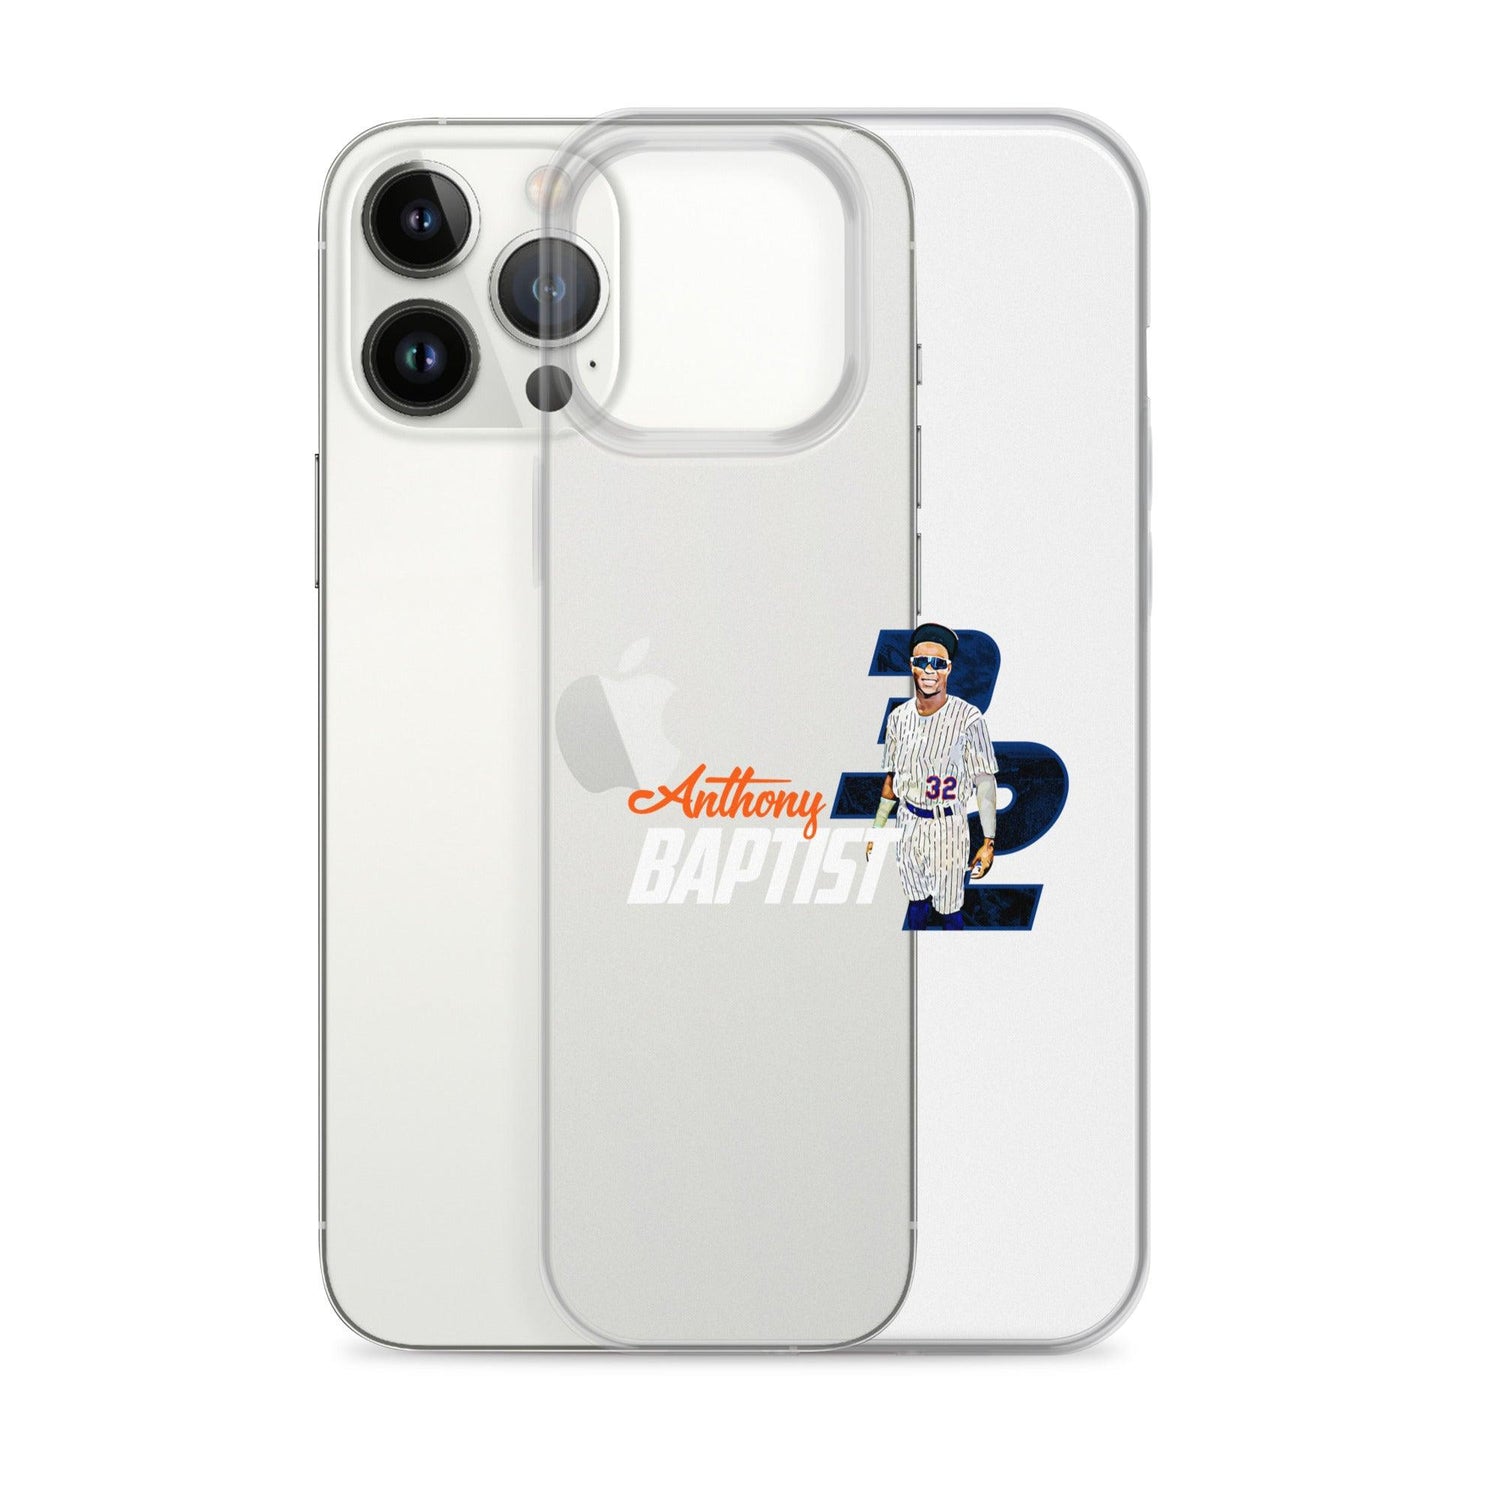 Anthony Baptist "Gameday" iPhone® - Fan Arch